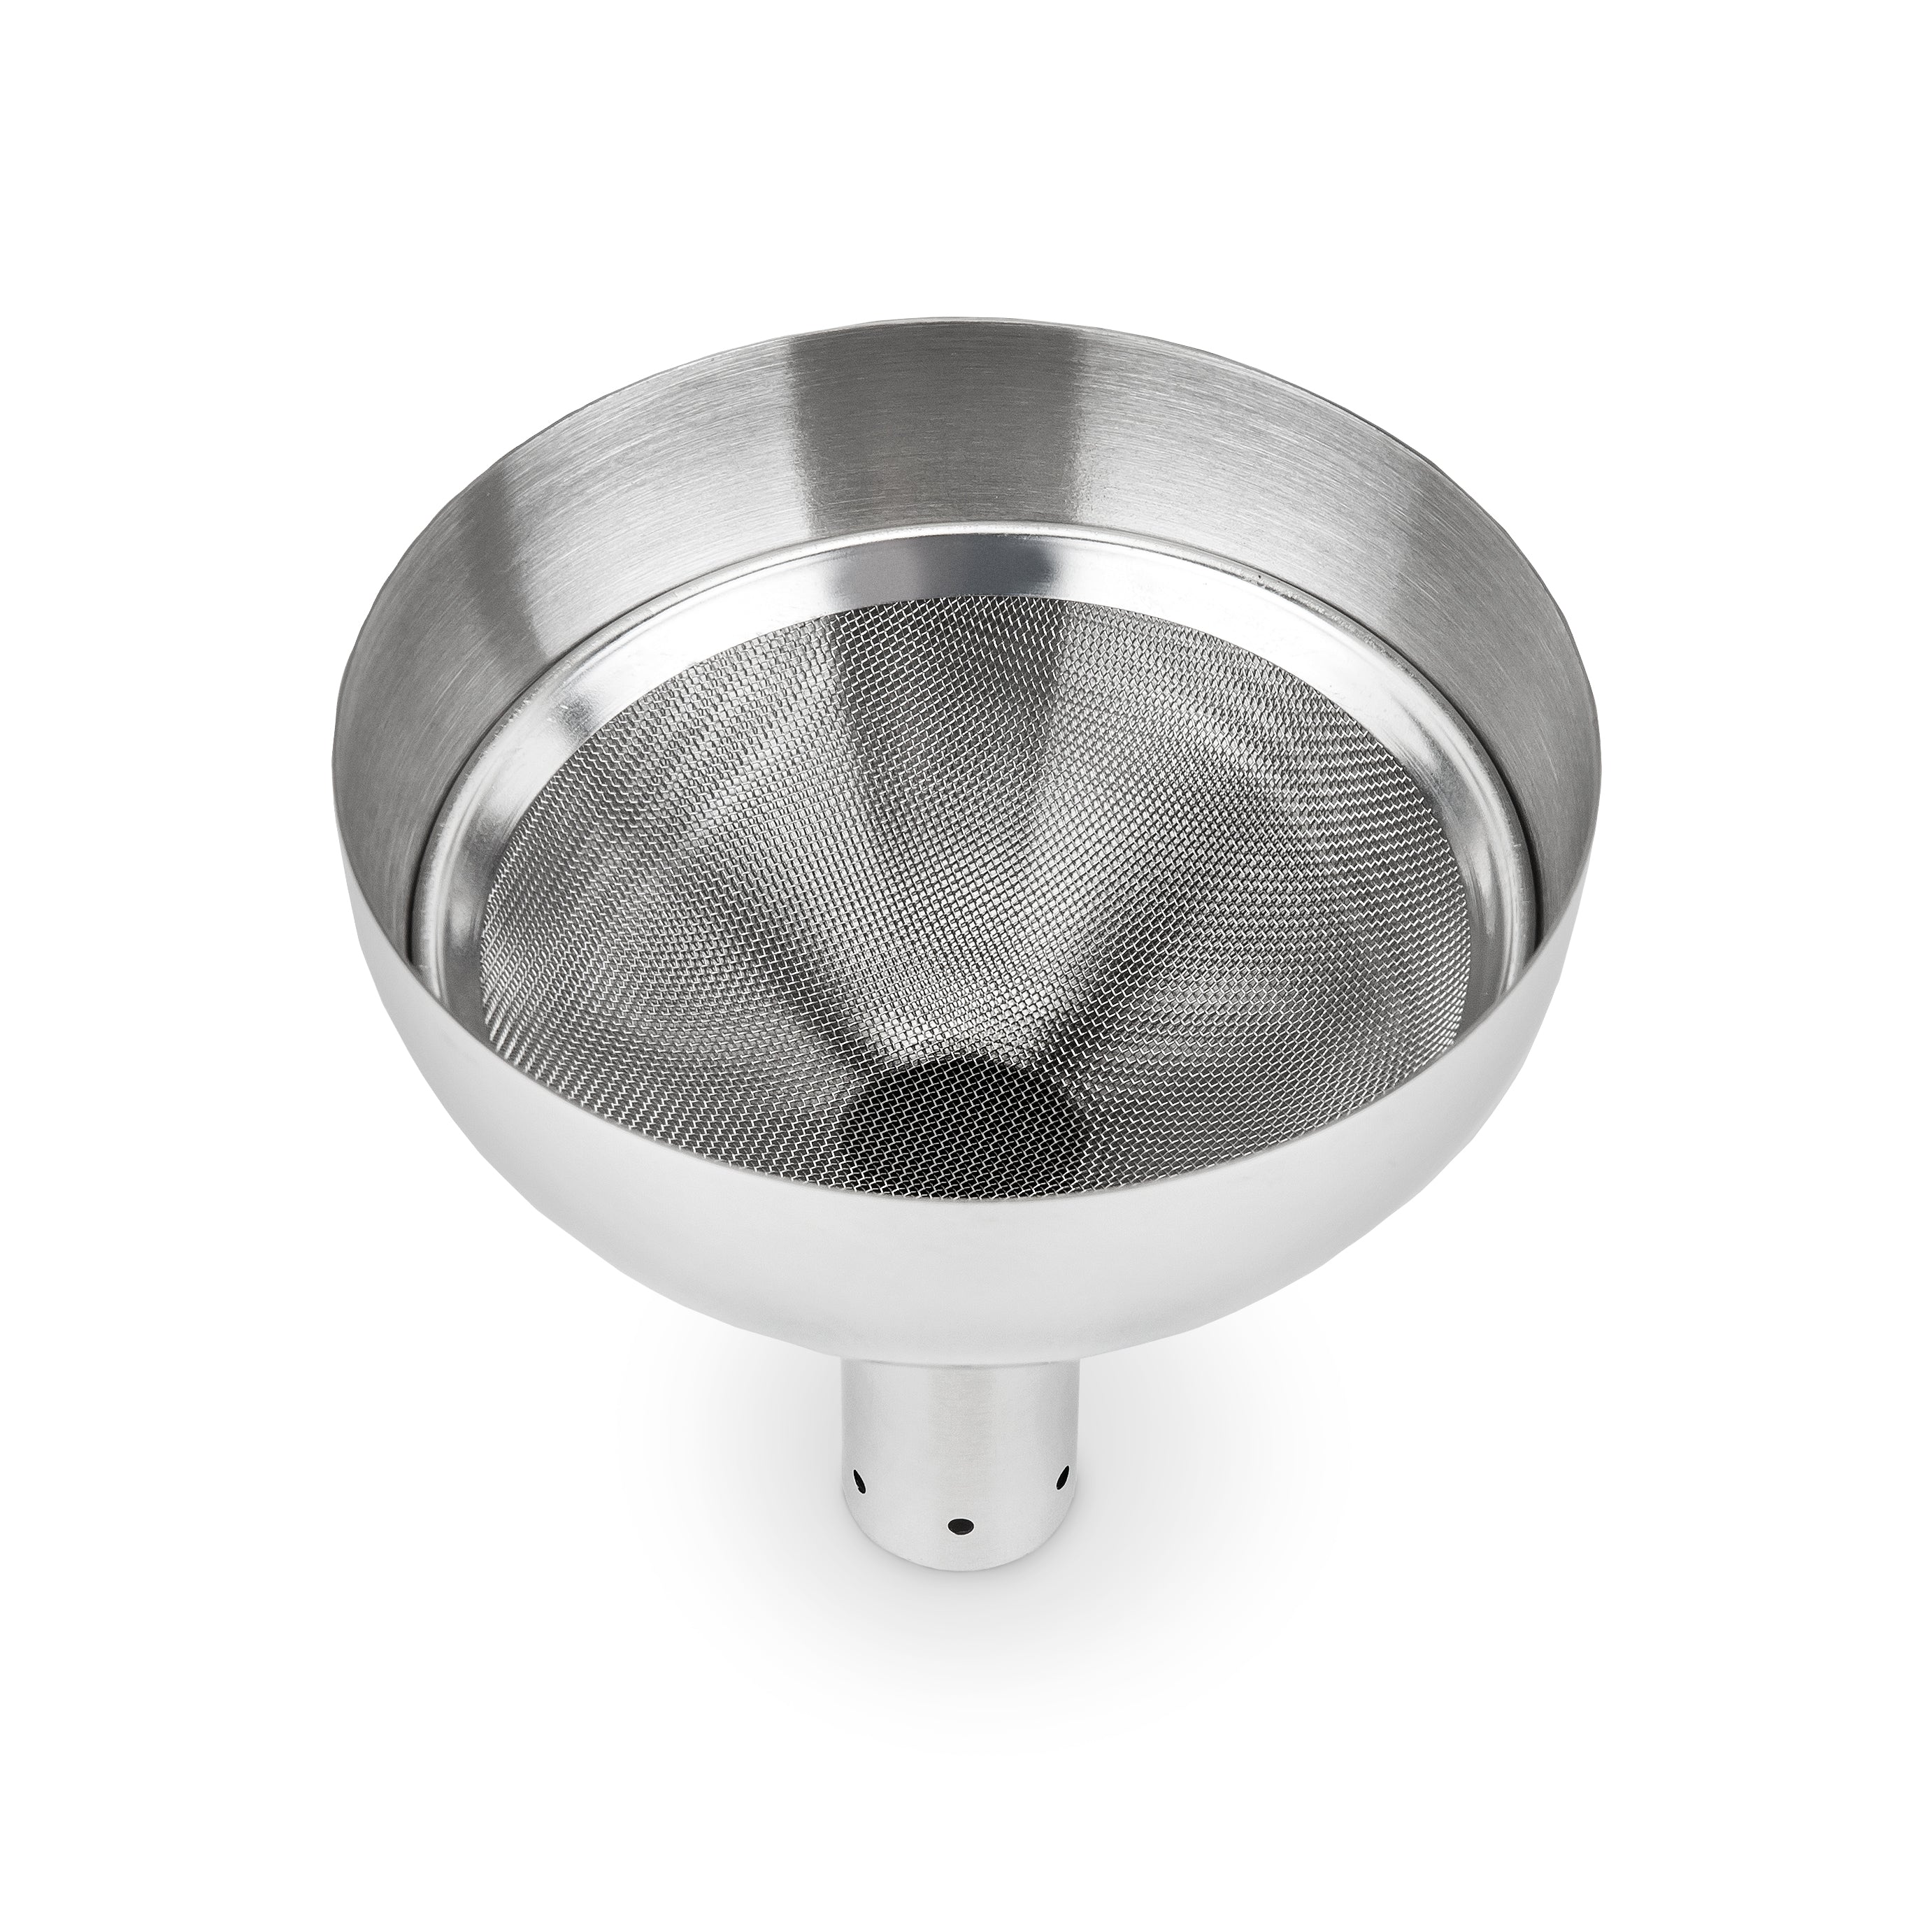 Fountain: Aerating Decanter Funnel